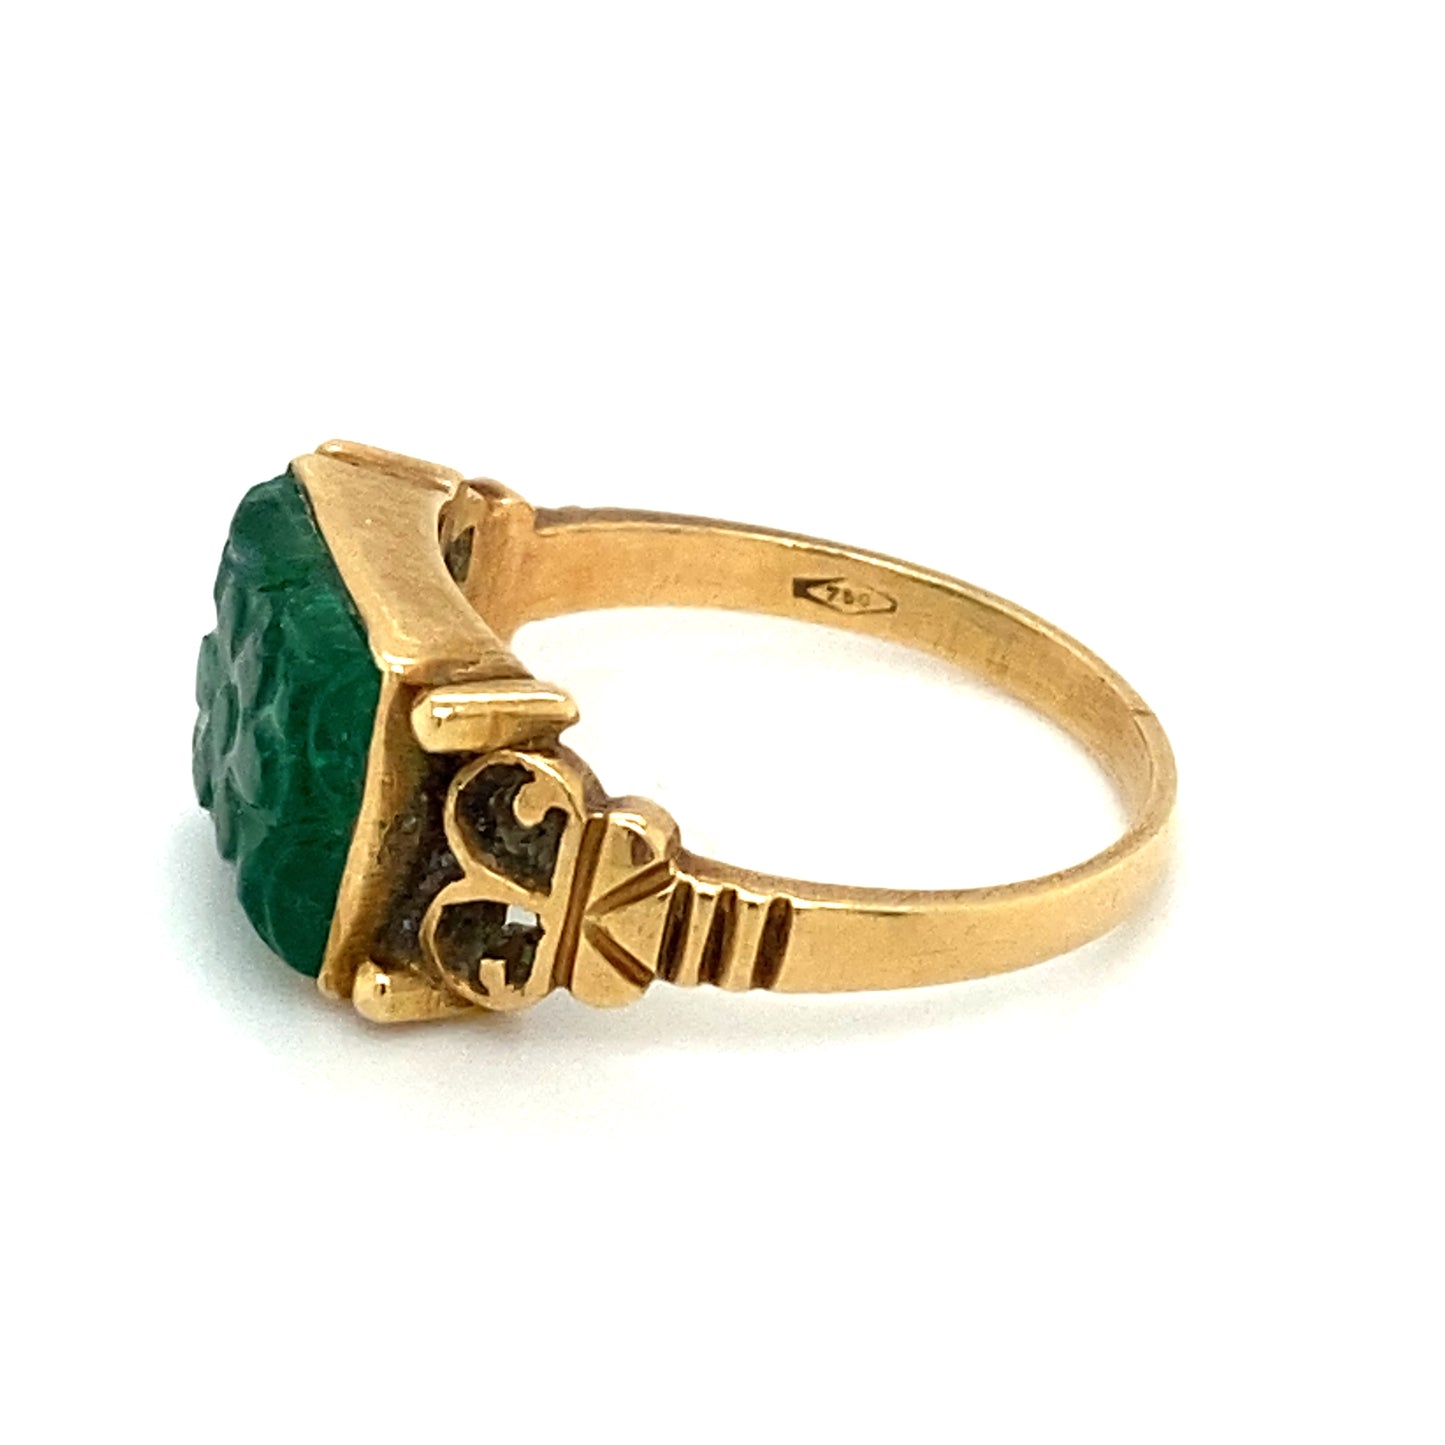 Circa 1920s Carved Emerald Flower Ring in 18K Gold